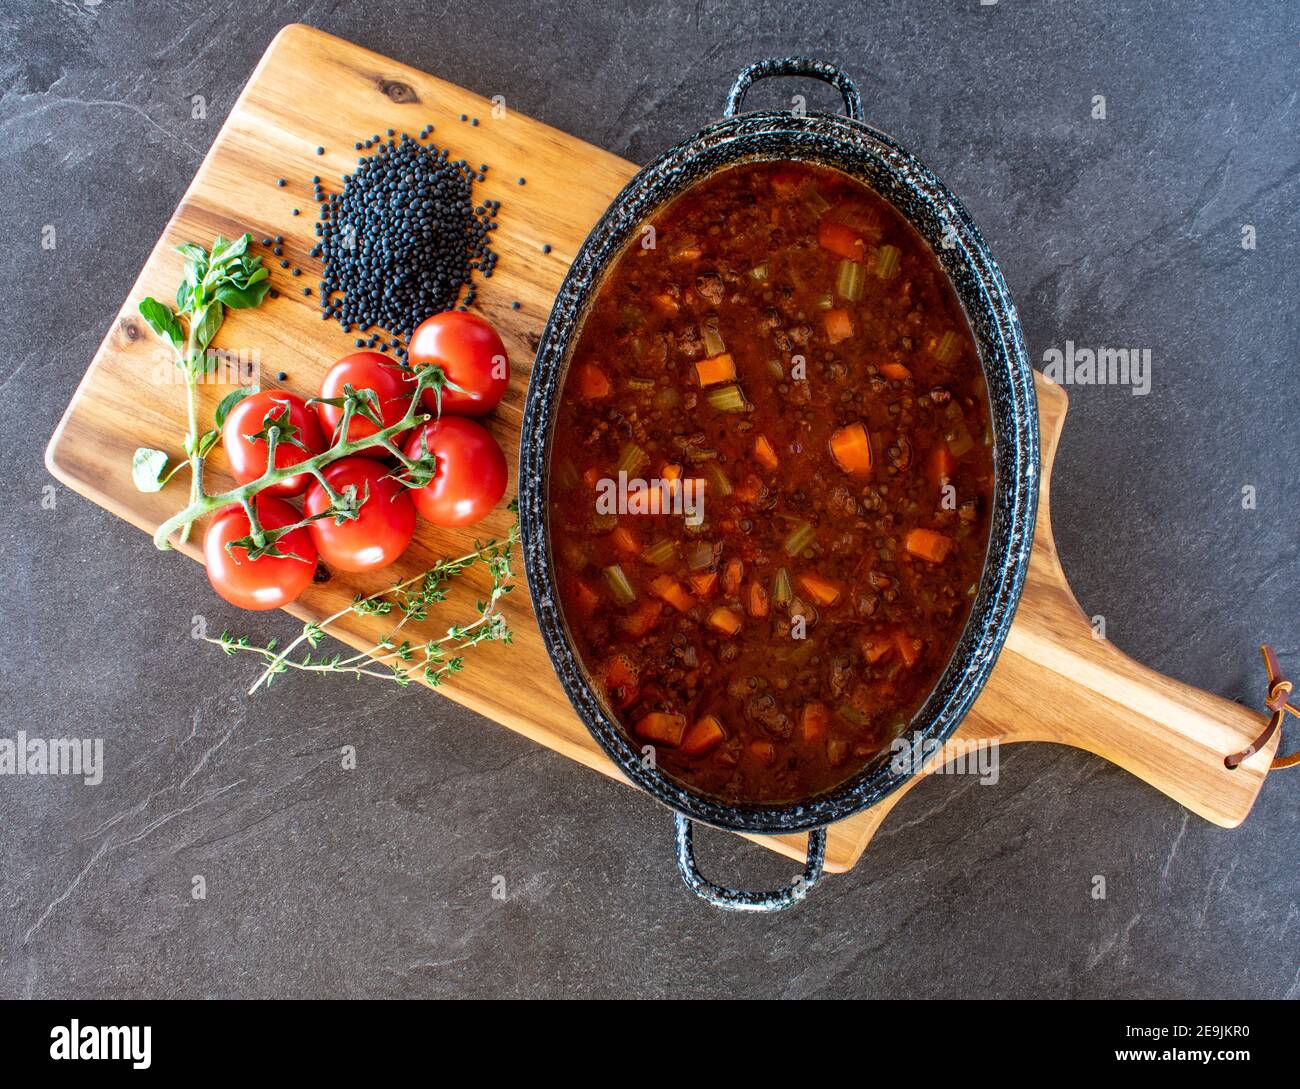 minced meat stew with beluga lentils and vegetables in a spicy tomato sauce served in a pot from above Stock Photo